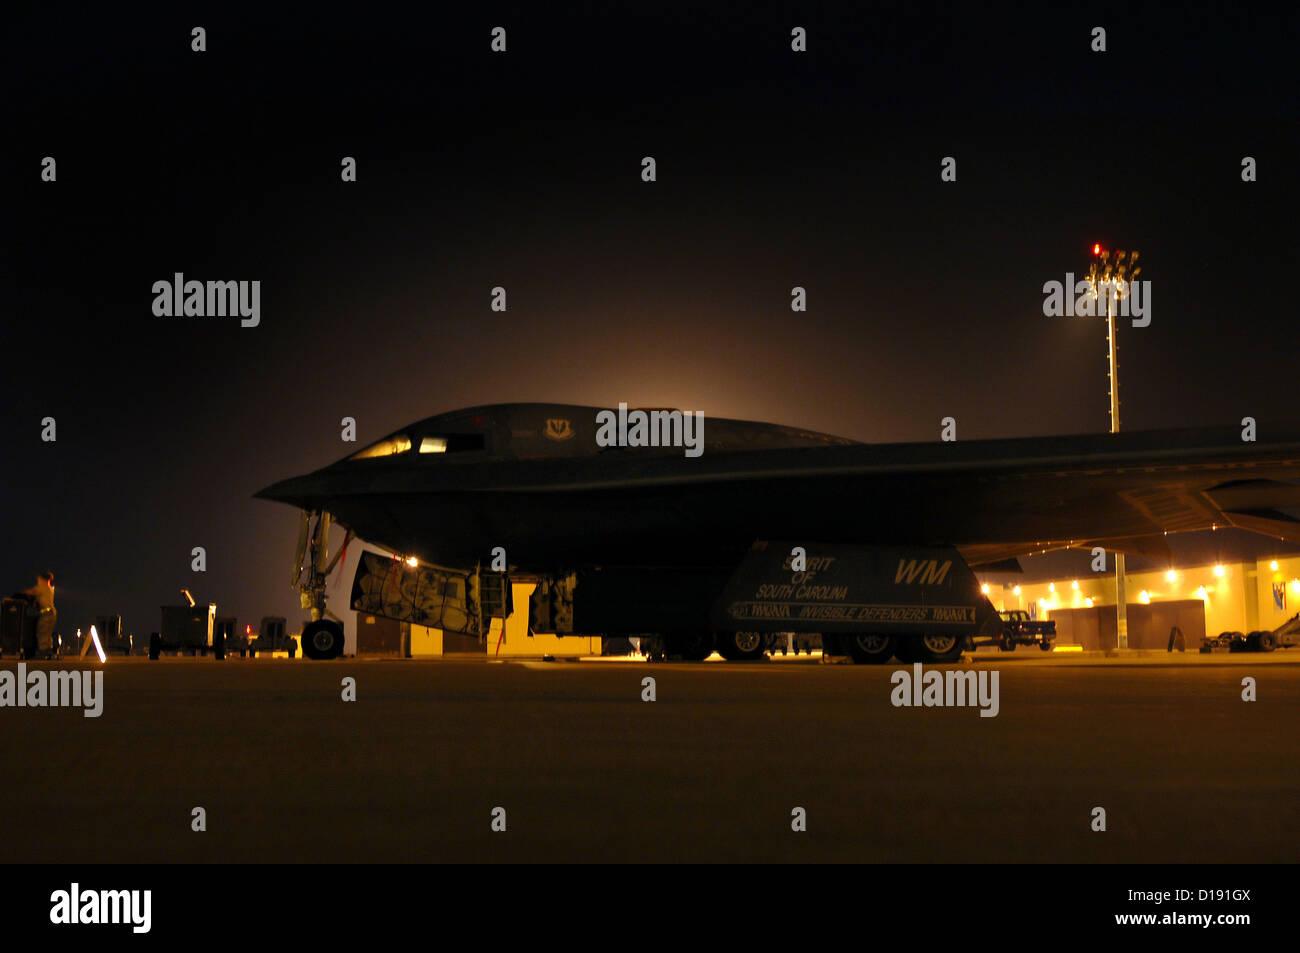 A B-2 Spirit stealth bomber on the flight line following night operations at Whiteman Air Force Base August 26, 2009 in Knob Noster, MO. Stock Photo